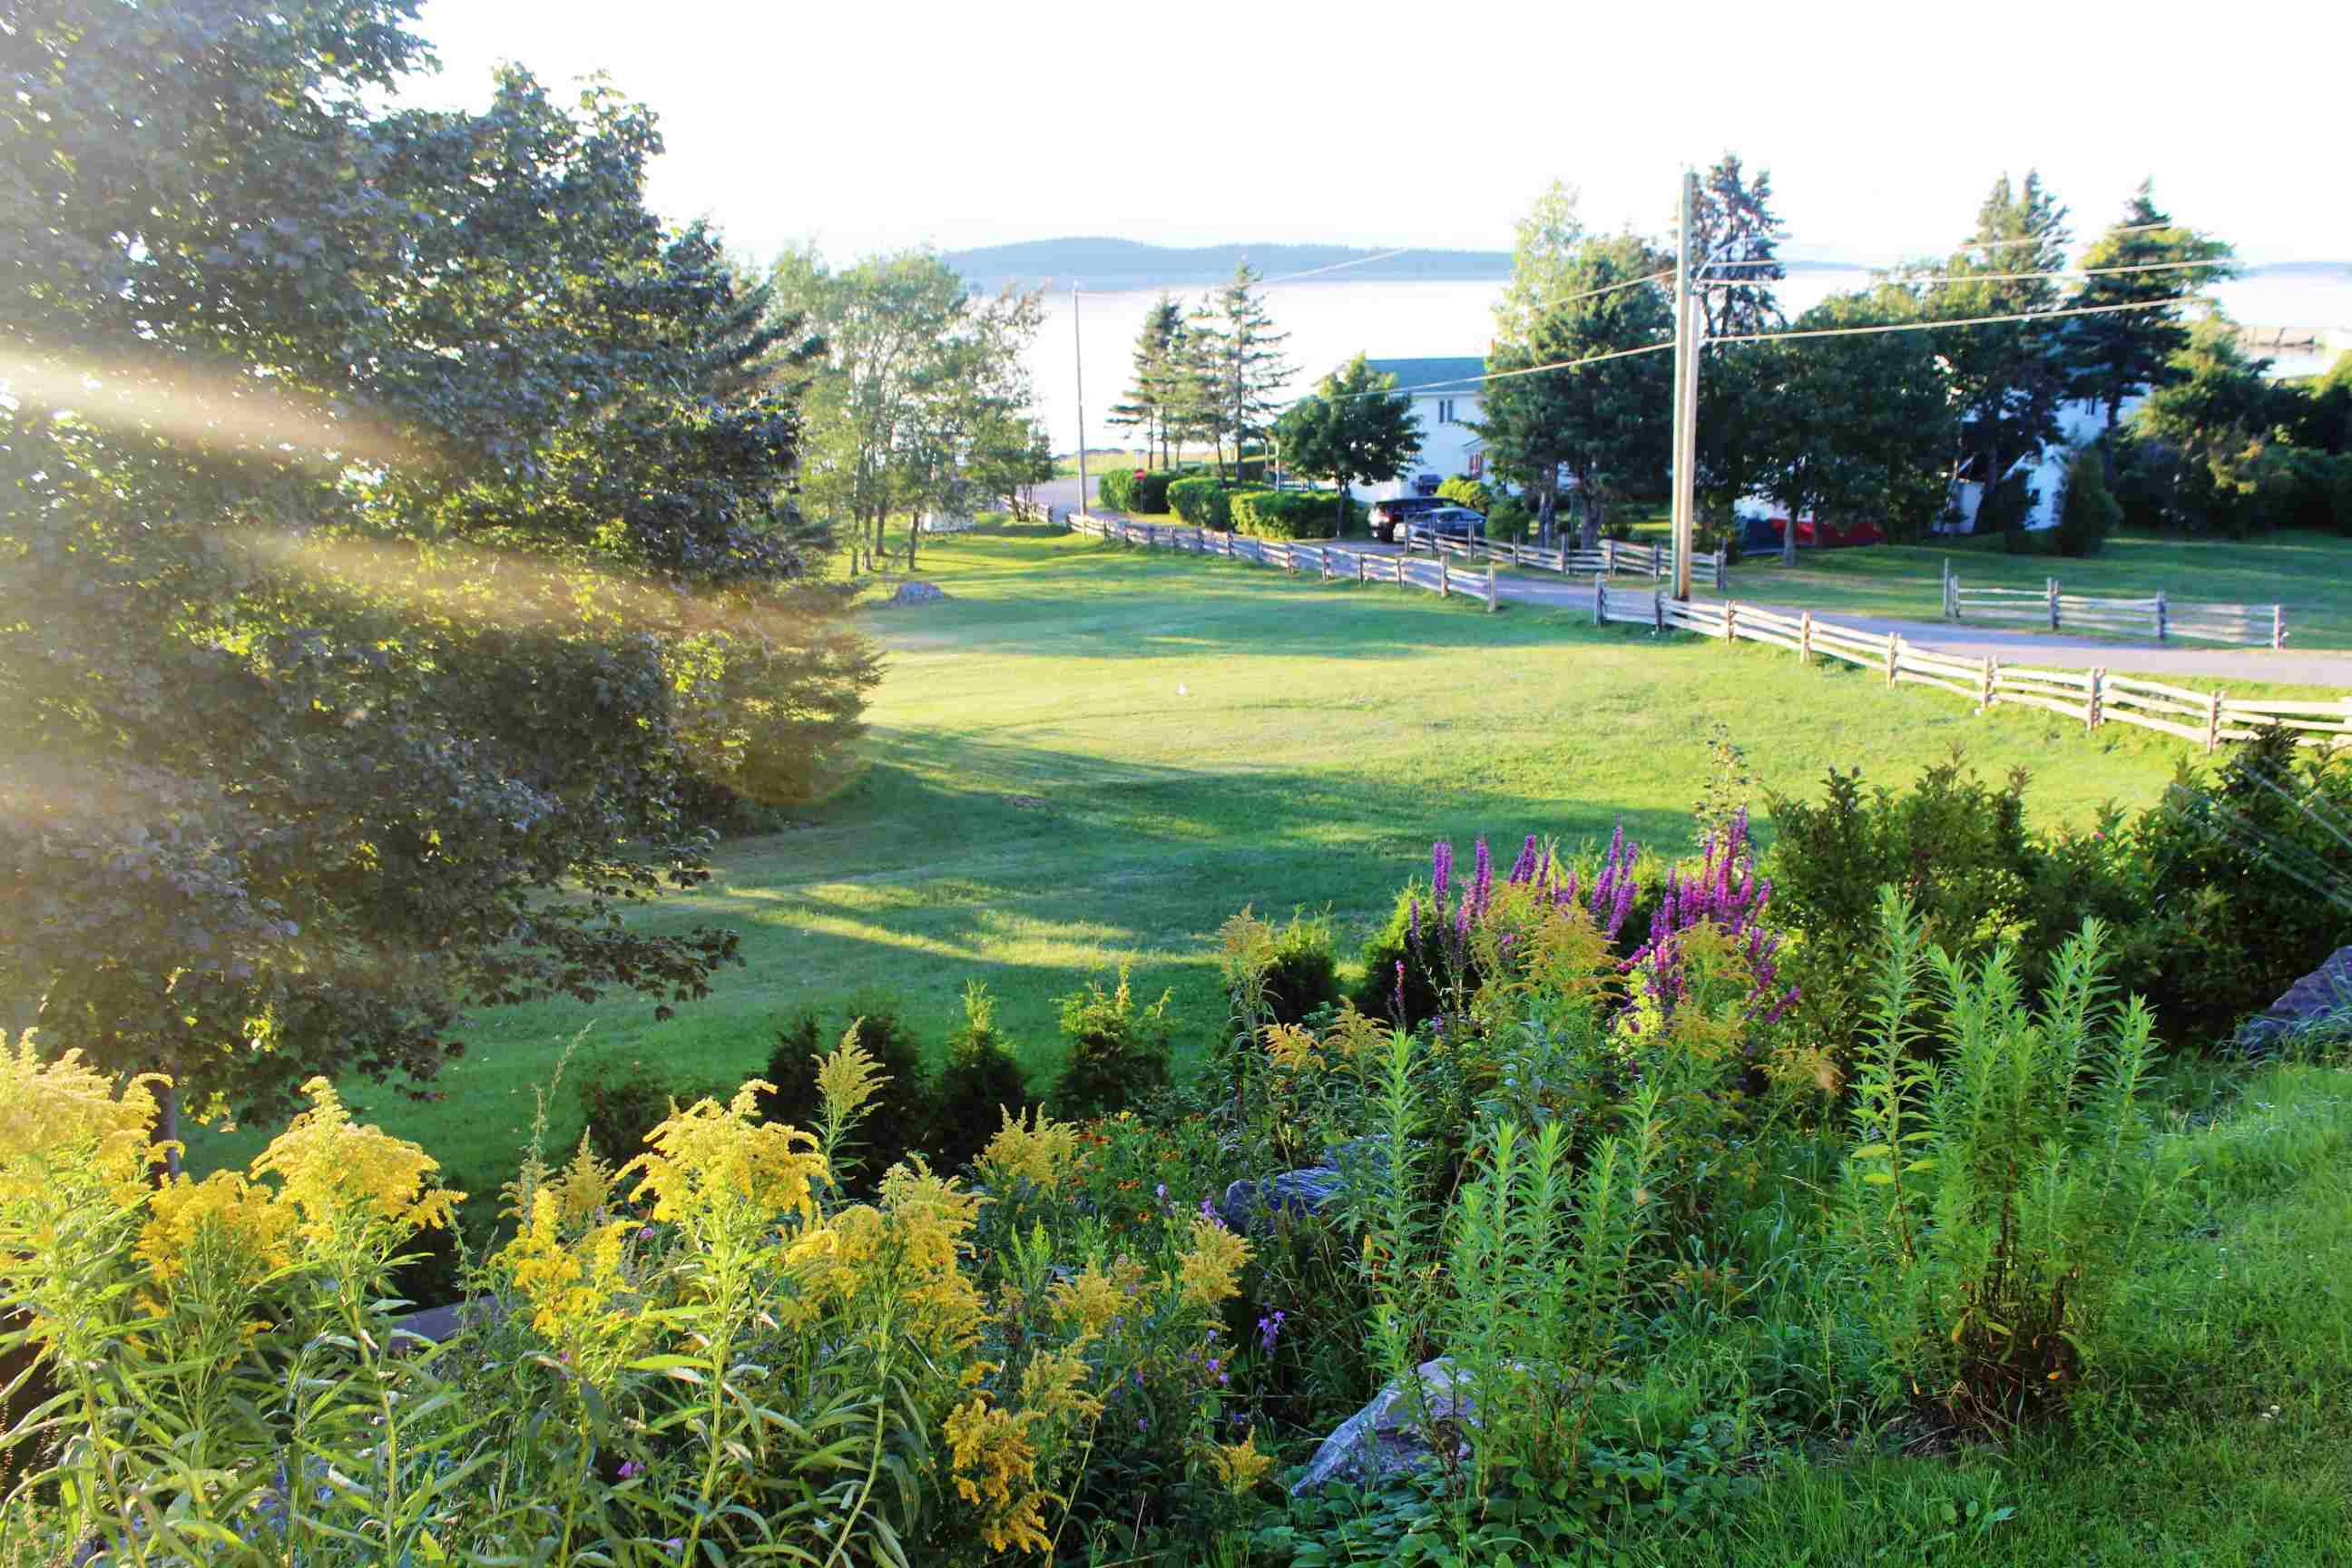 A colour photograph of flower beds and a wide lawn descending to the river.